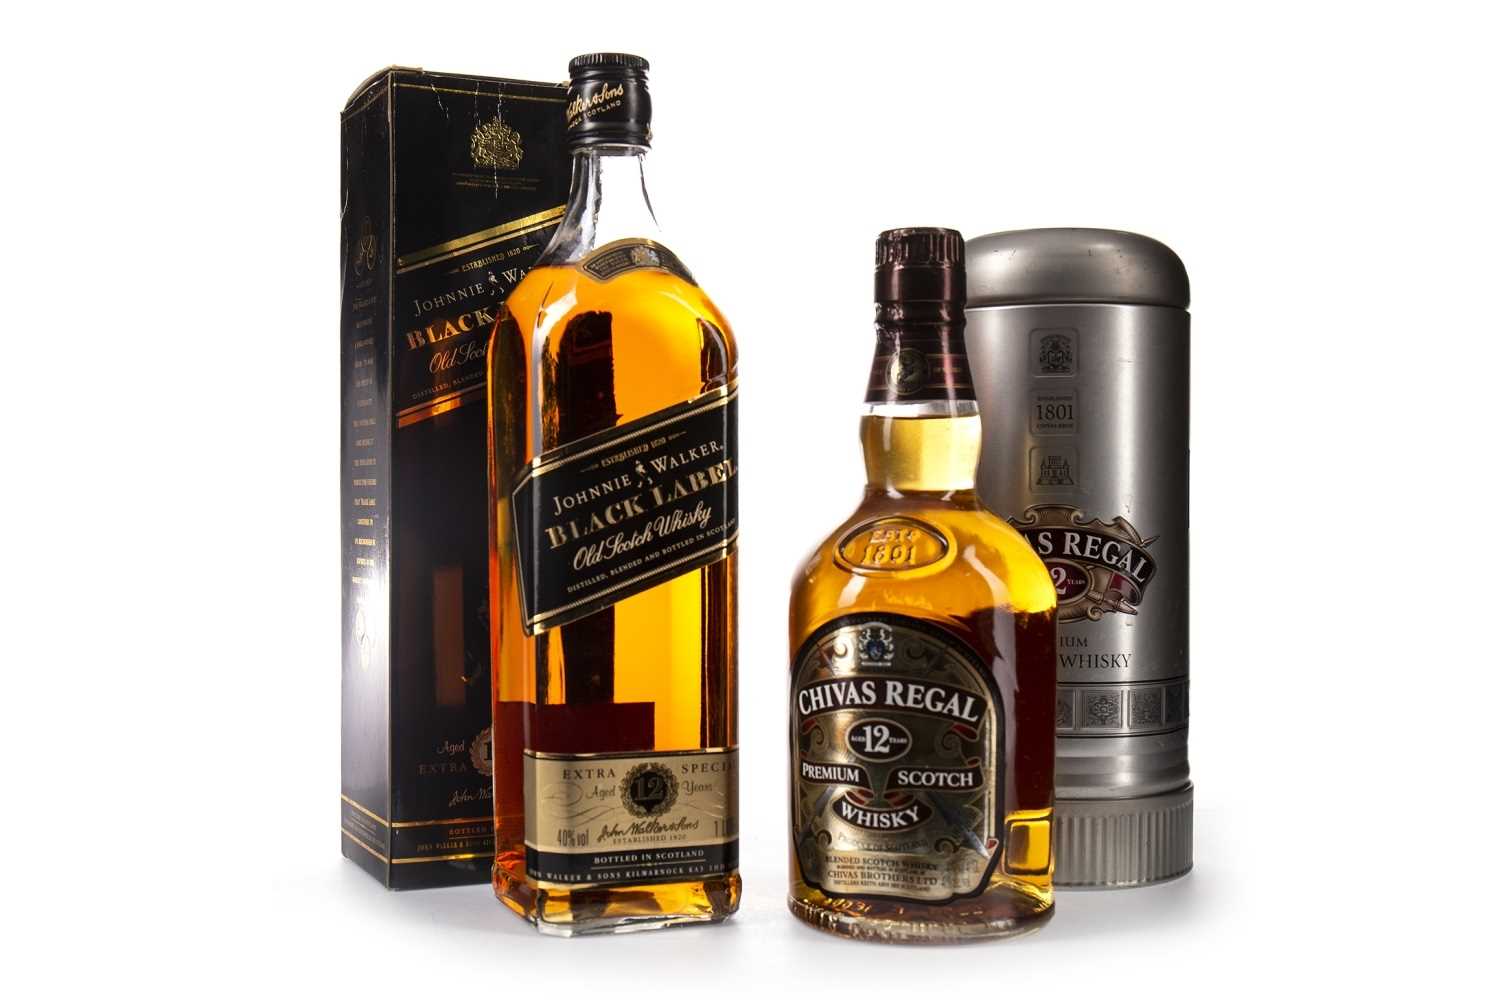 Lot 464 - CHIVAS REGAL 12 YEARS OLD AND A JOHNNIE WALKER BLACK LABEL 12 YEARS OLD